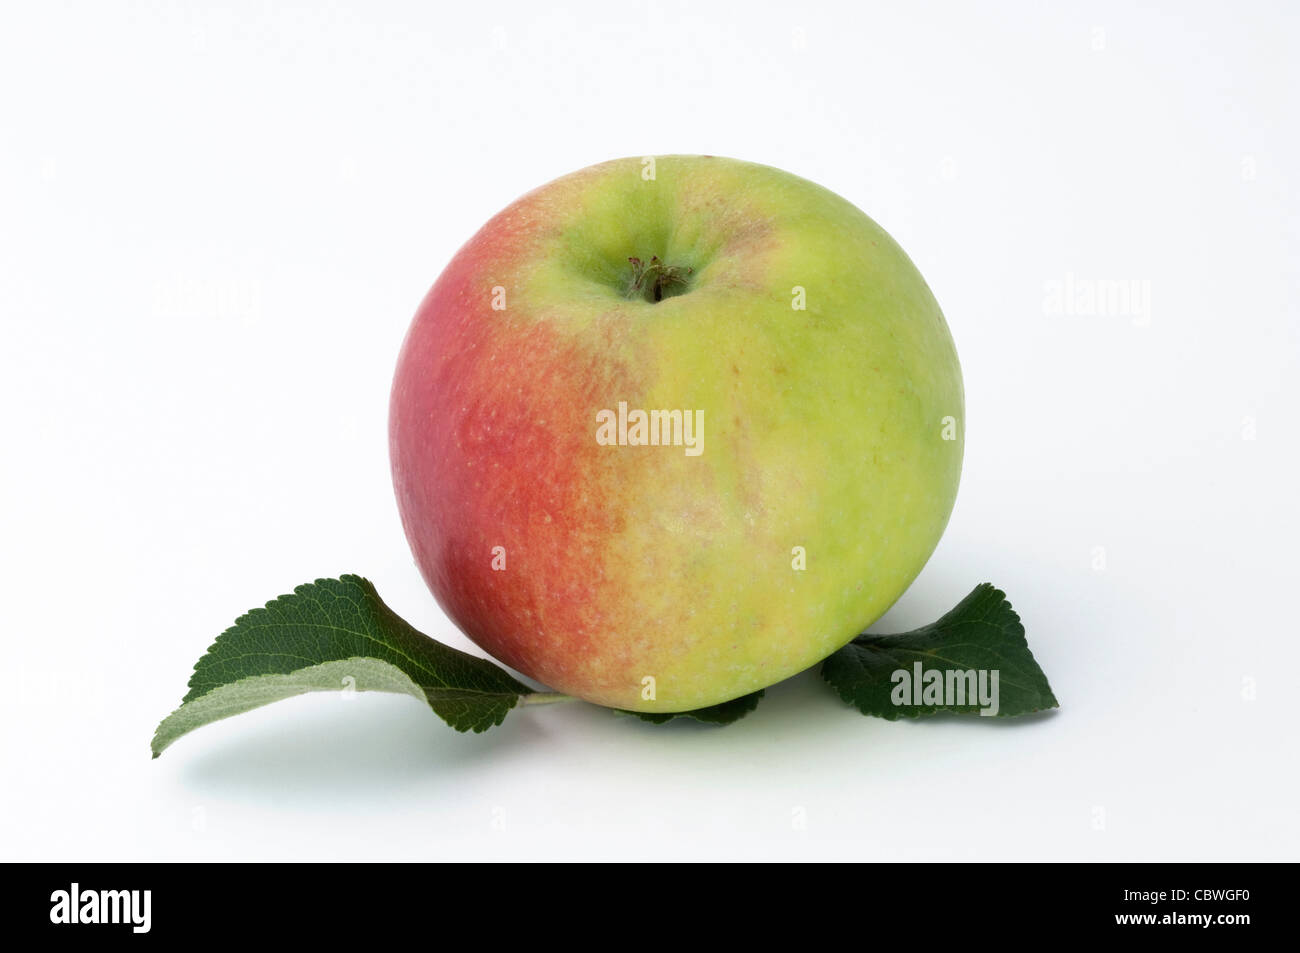 Domestic Apple (Malus domestica), variety: American Mother, The Mother, ripe fruit. Studio picture against a white background. Stock Photo